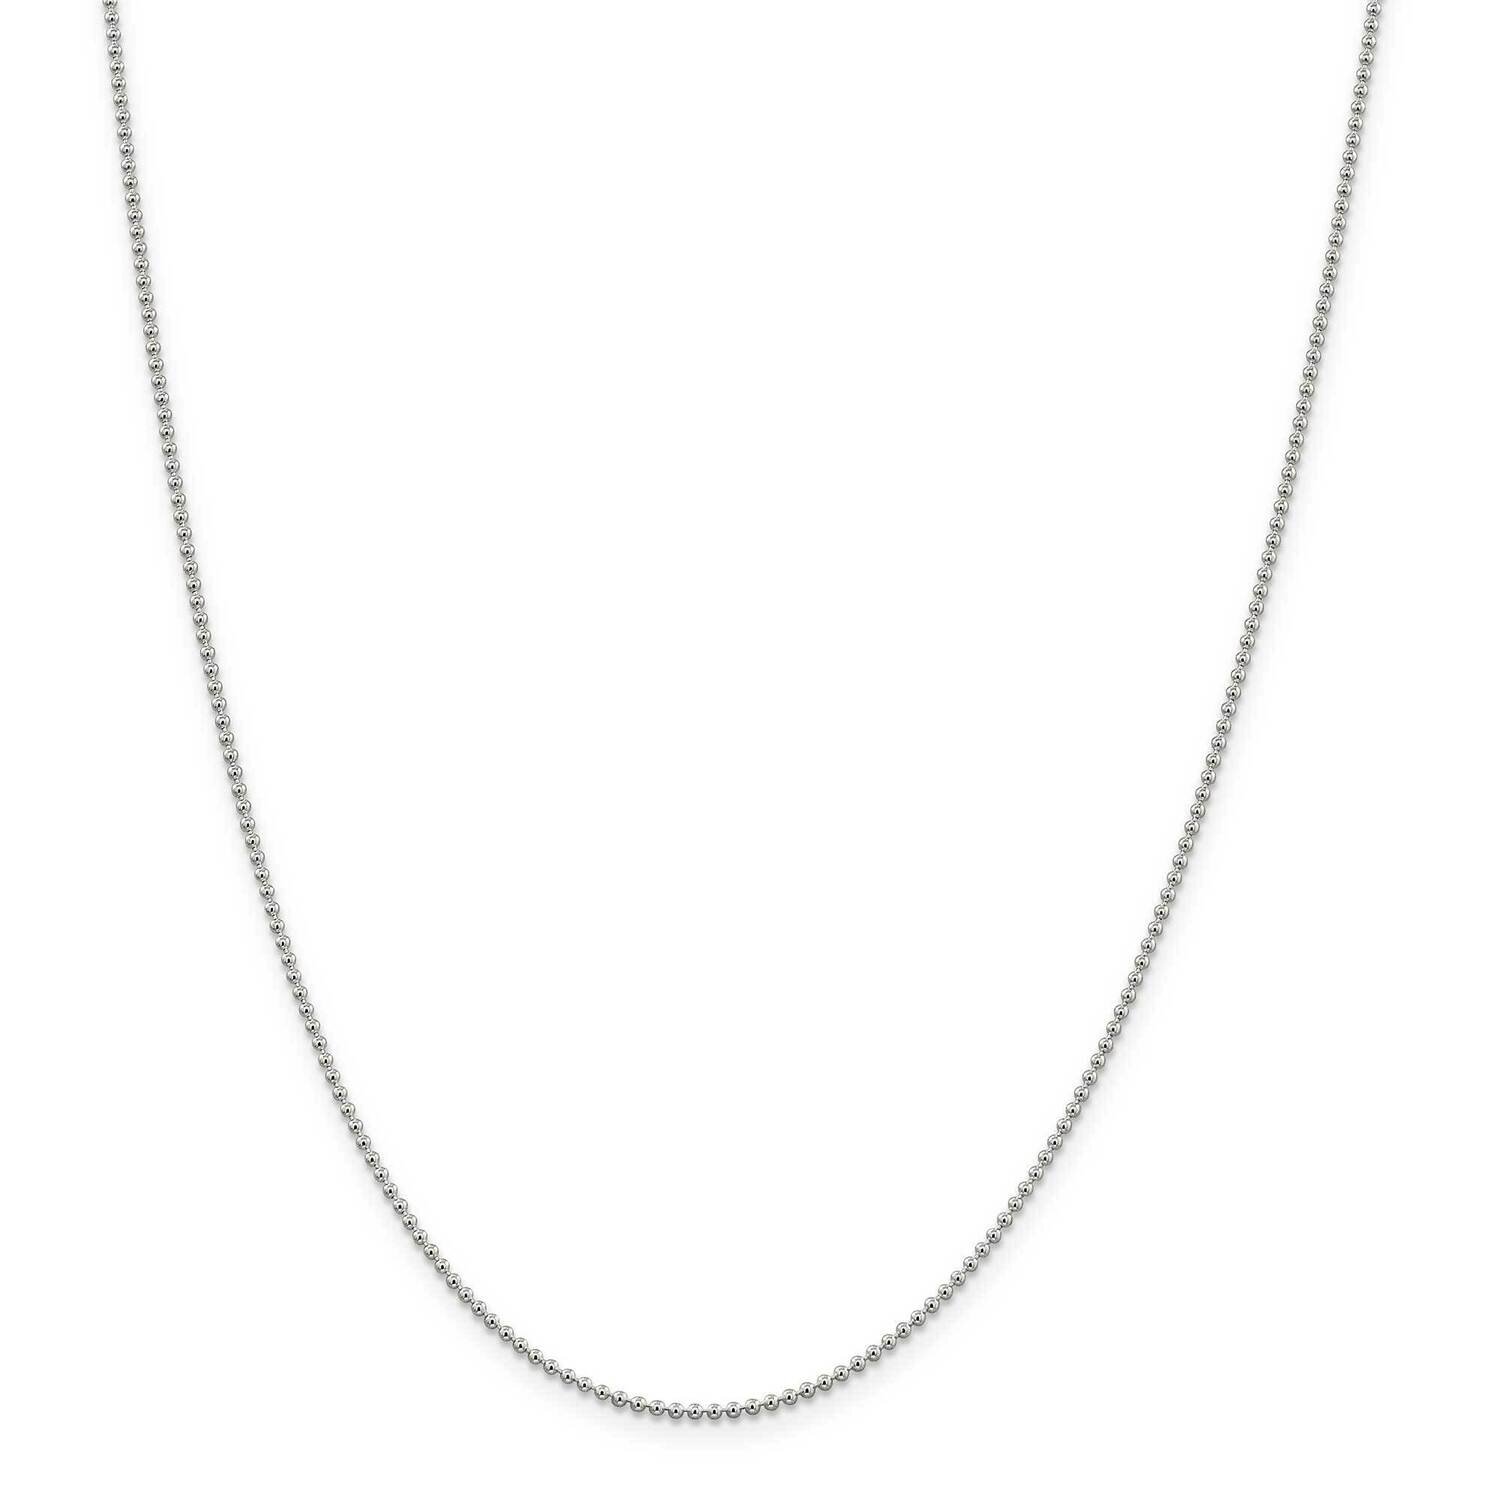 1.5mm Beaded Chain 30 Inch Sterling Silver QK81-30